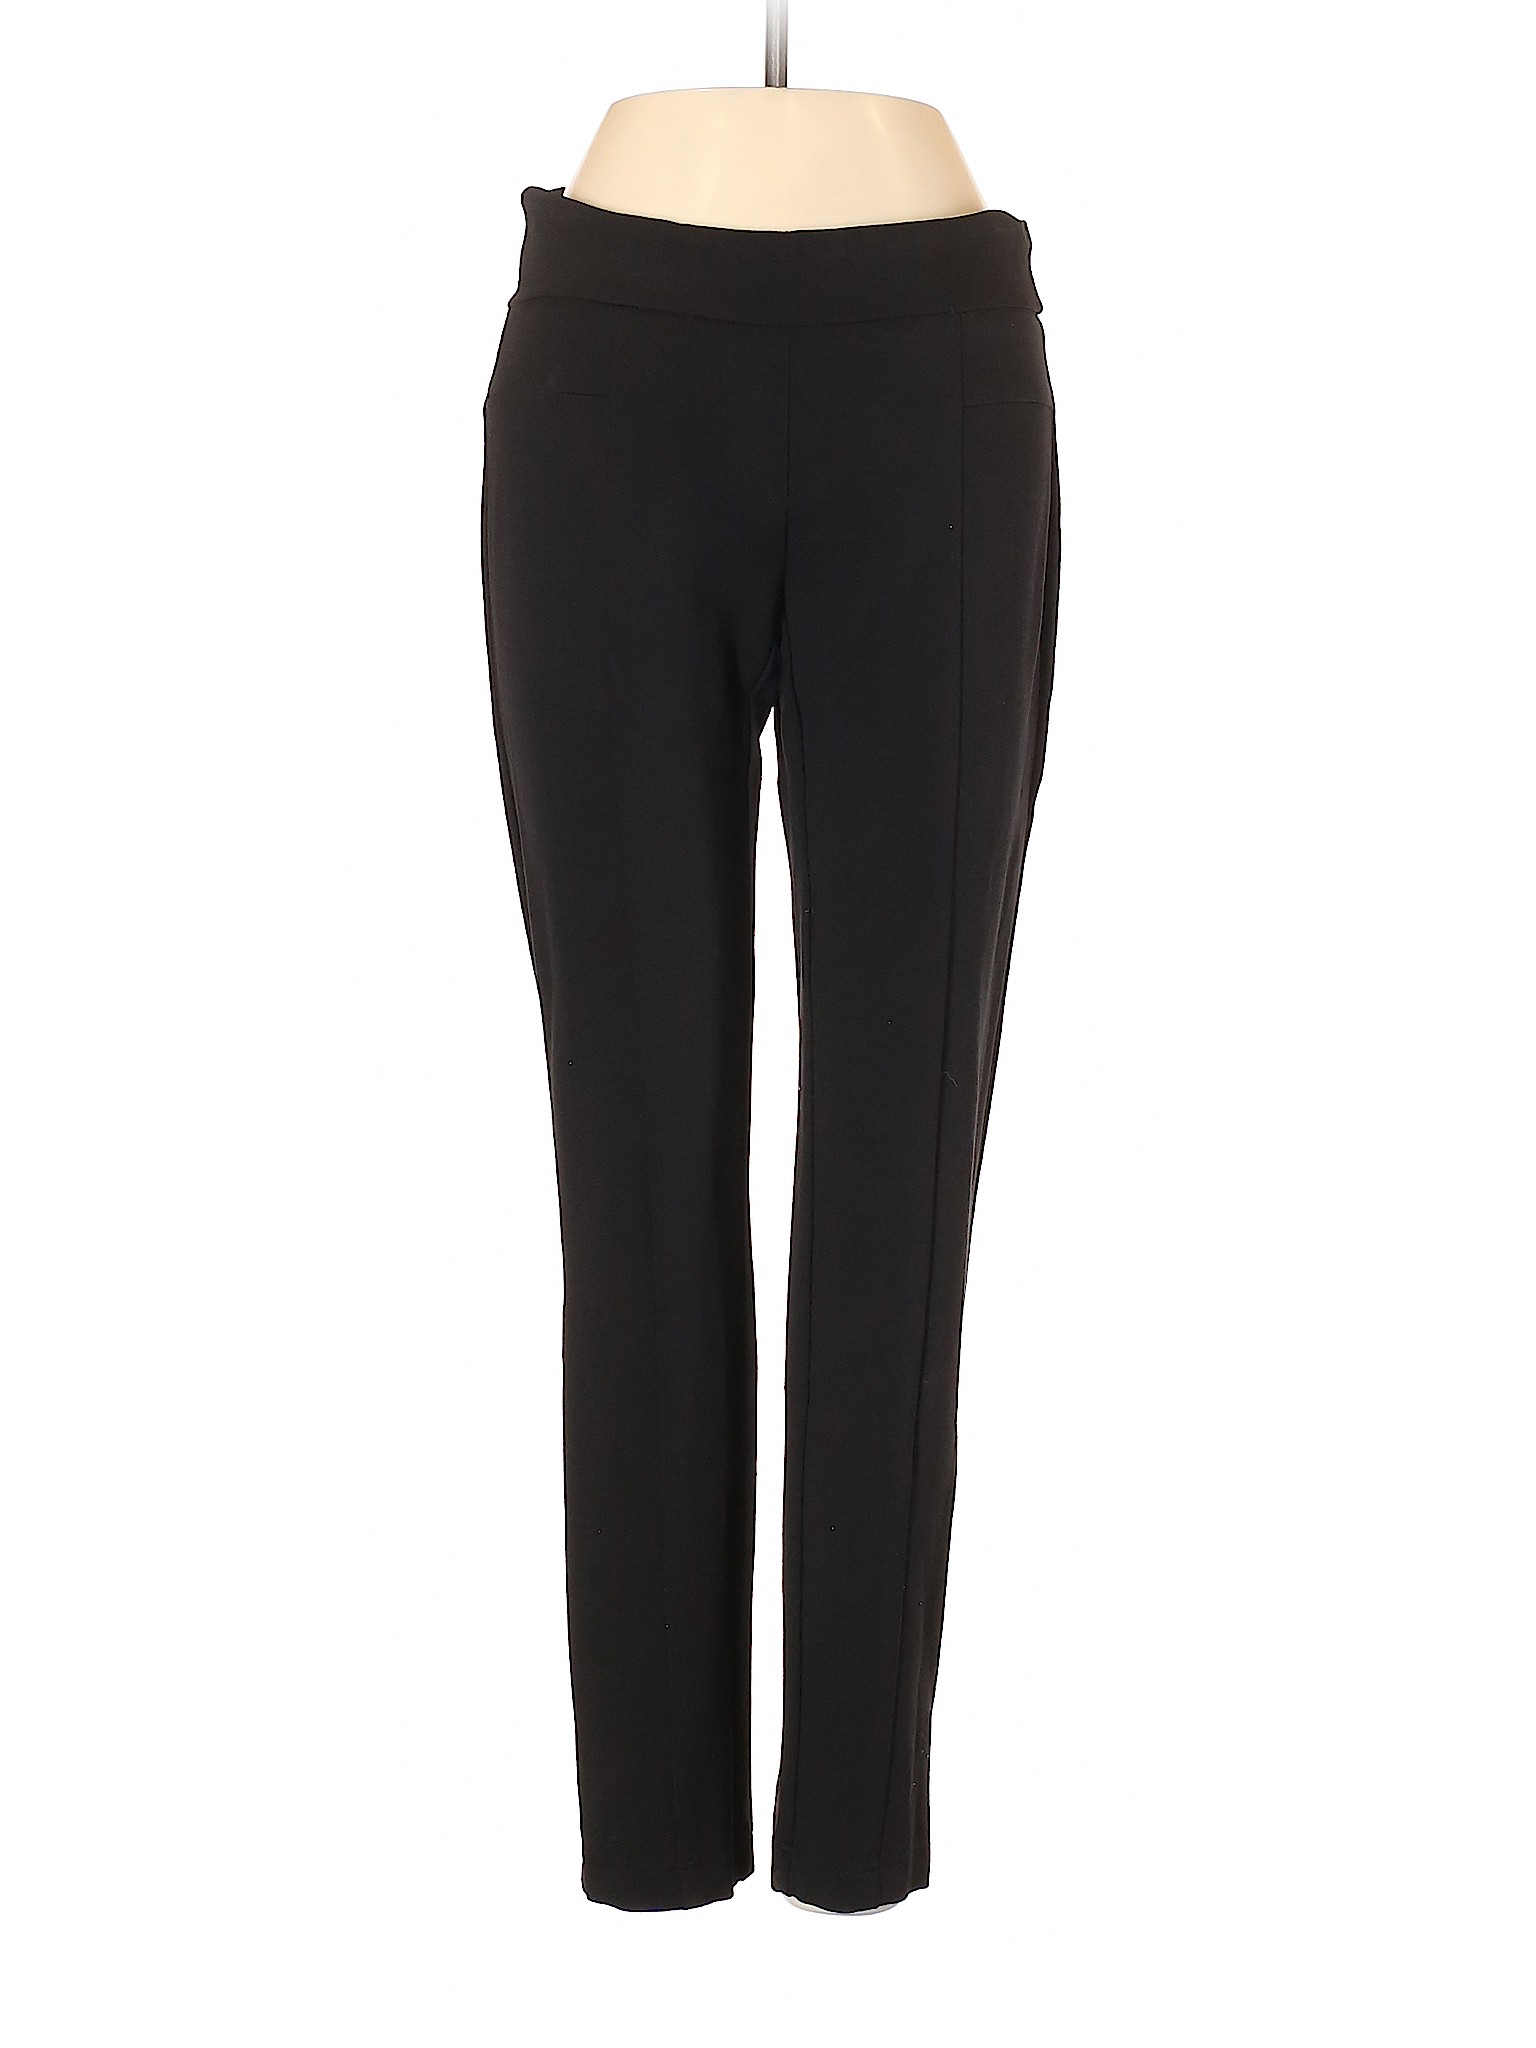 Dalia Collection Solid Black Casual Pants Size 2 - 77% off | thredUP